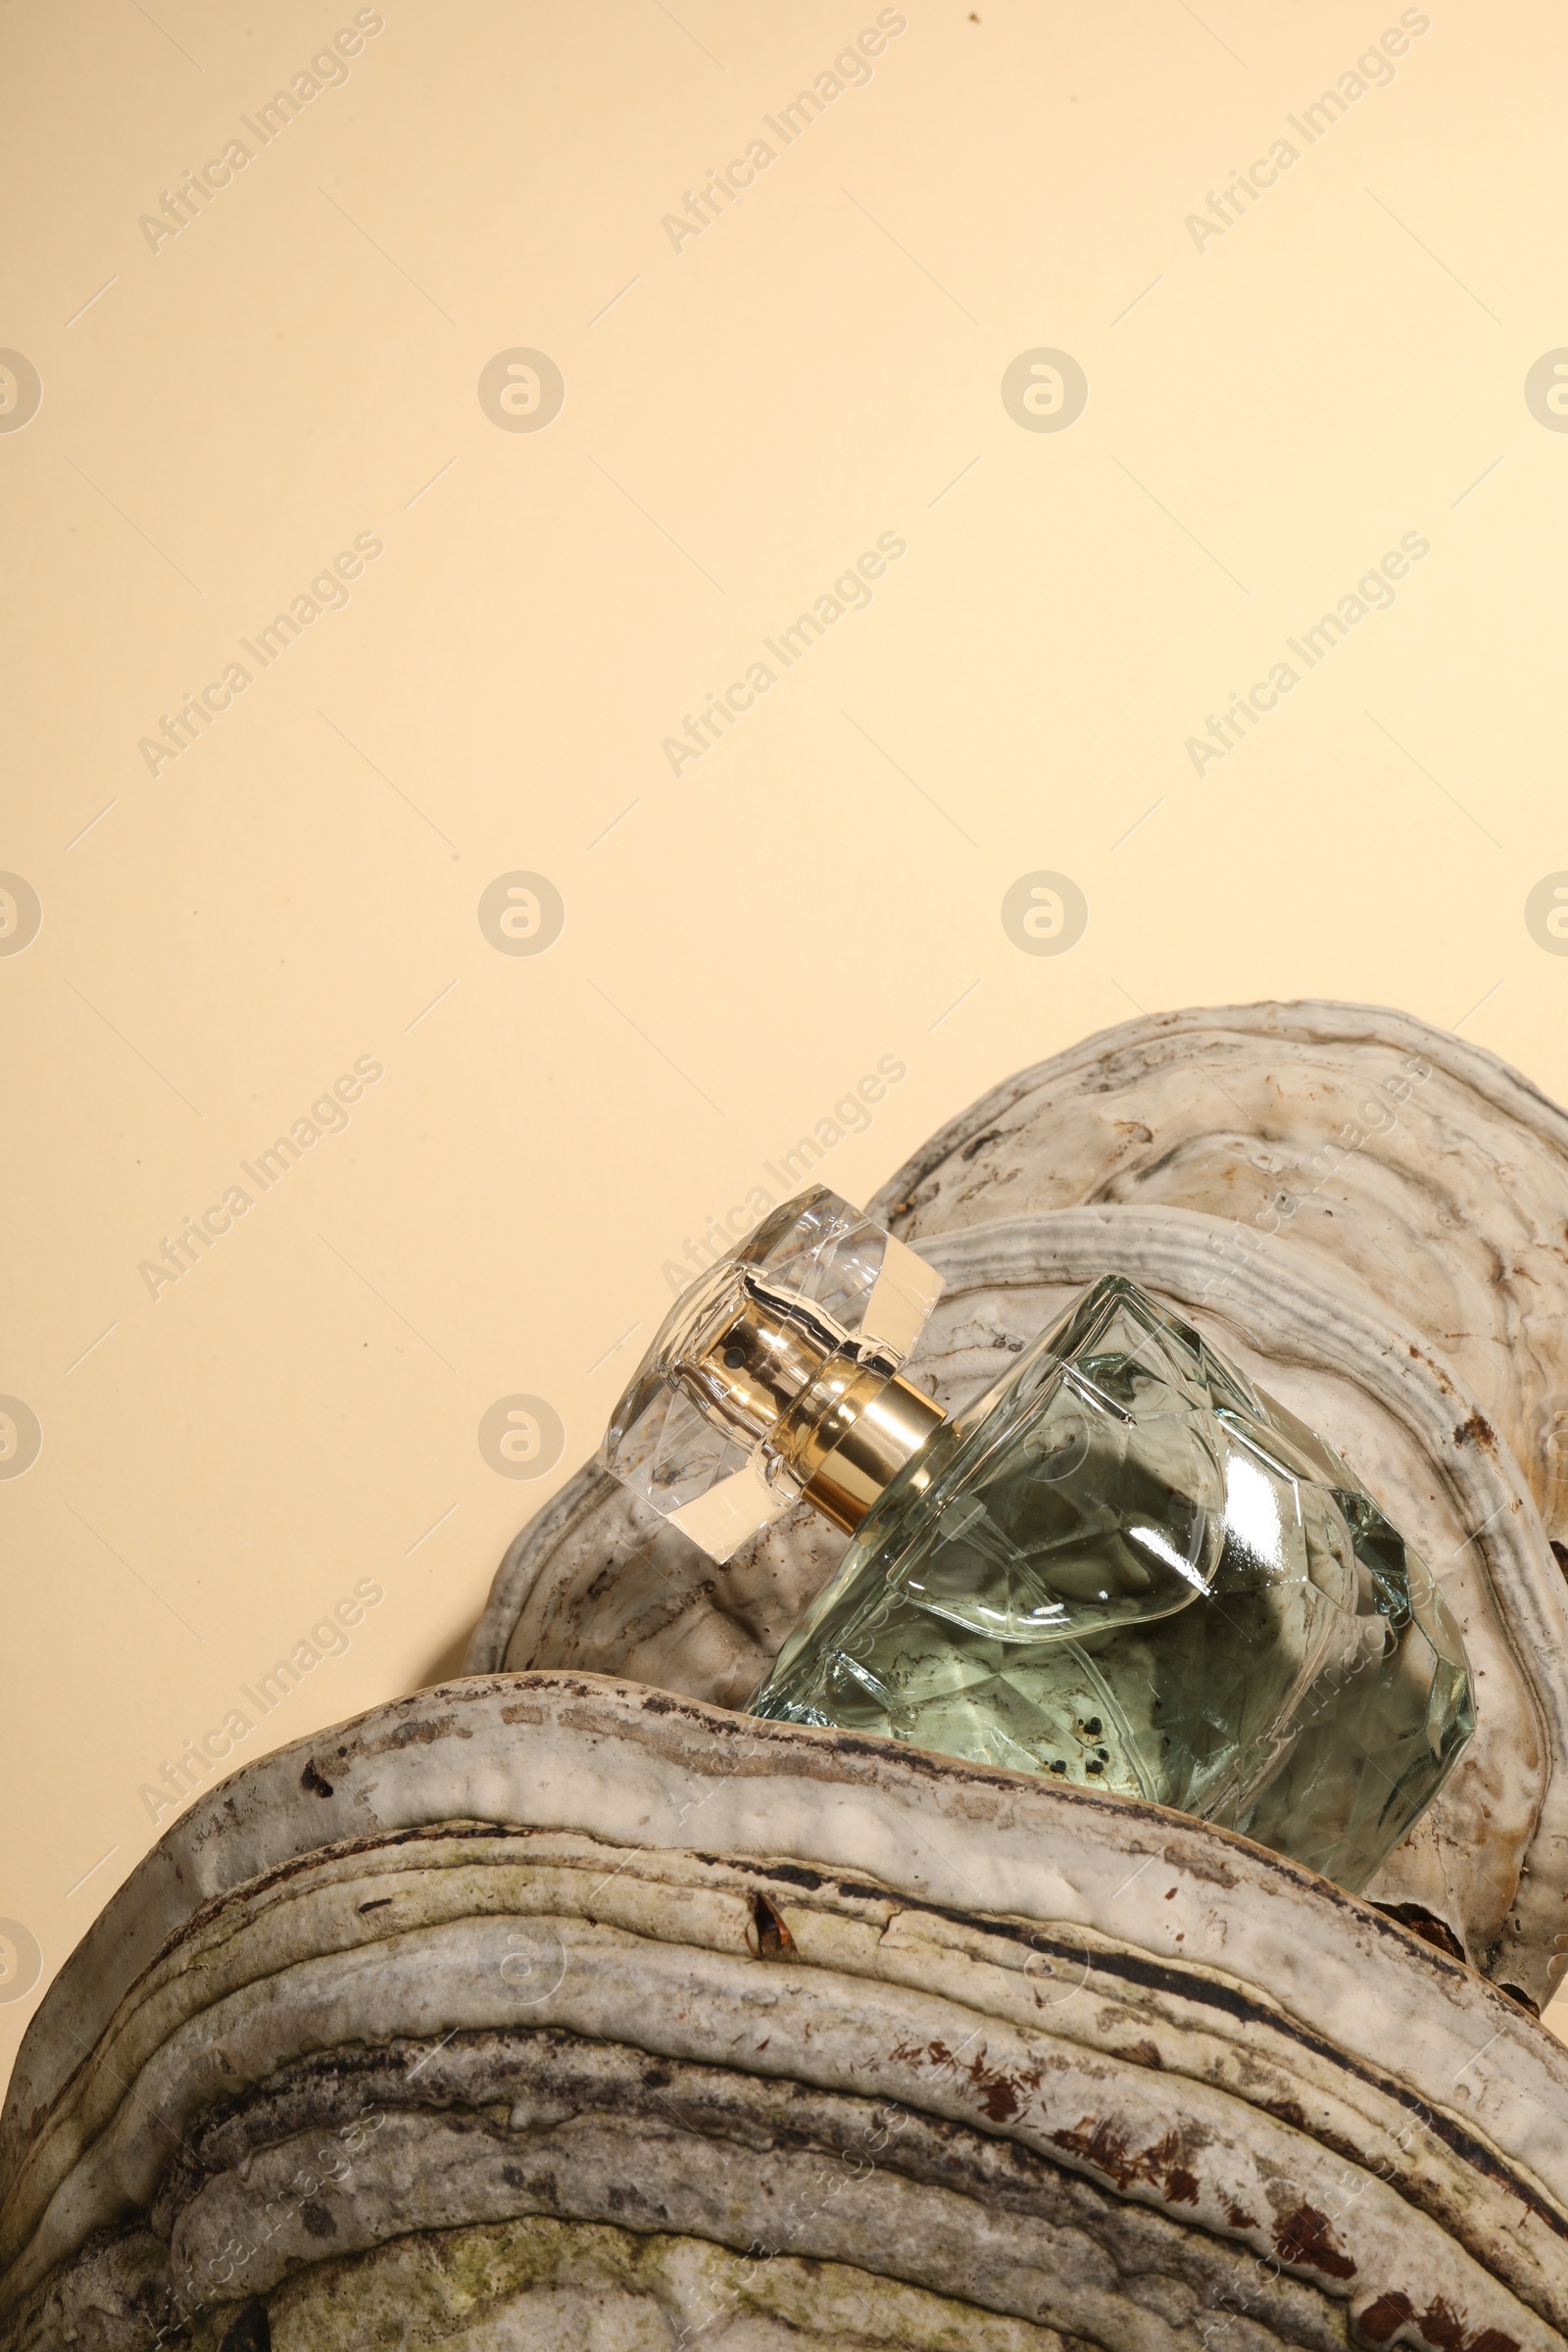 Photo of Luxury perfume in bottle on textured surface against beige background